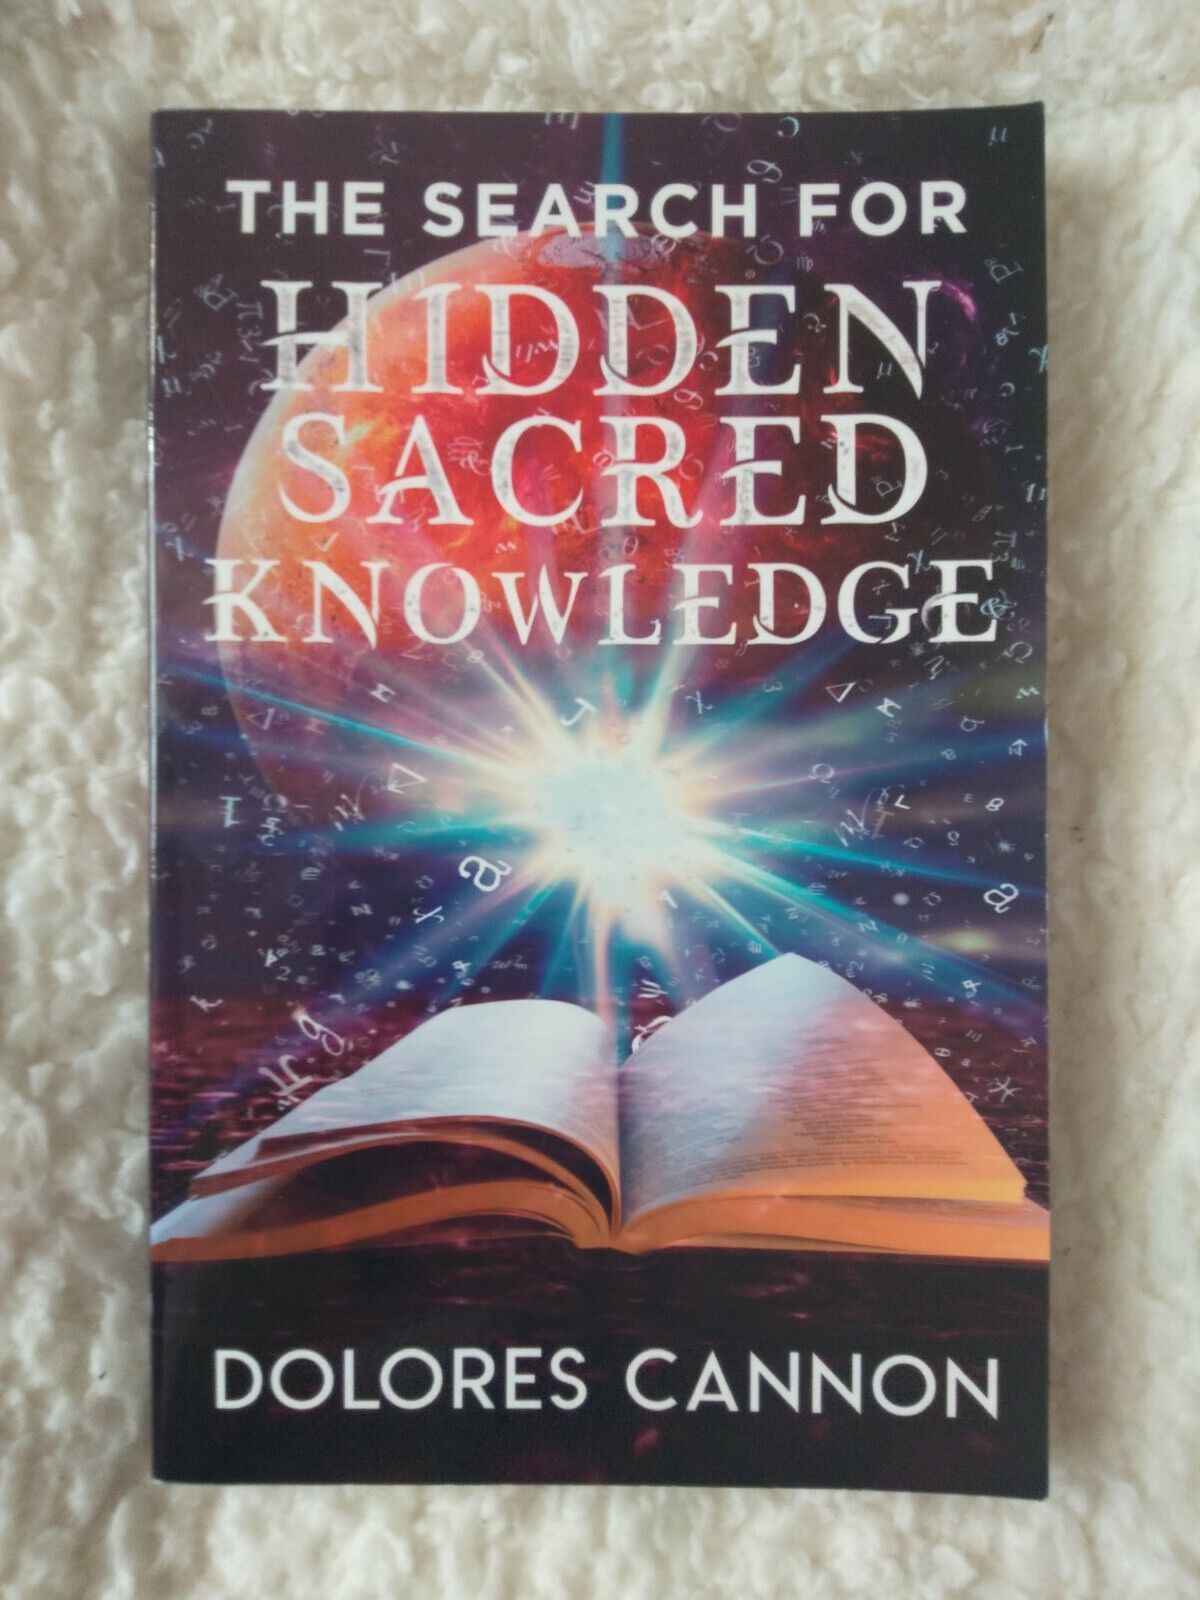 THE SEARCH FOR HIDDEN SACRED KNOWLEDGE SOFTCOVER BOOK